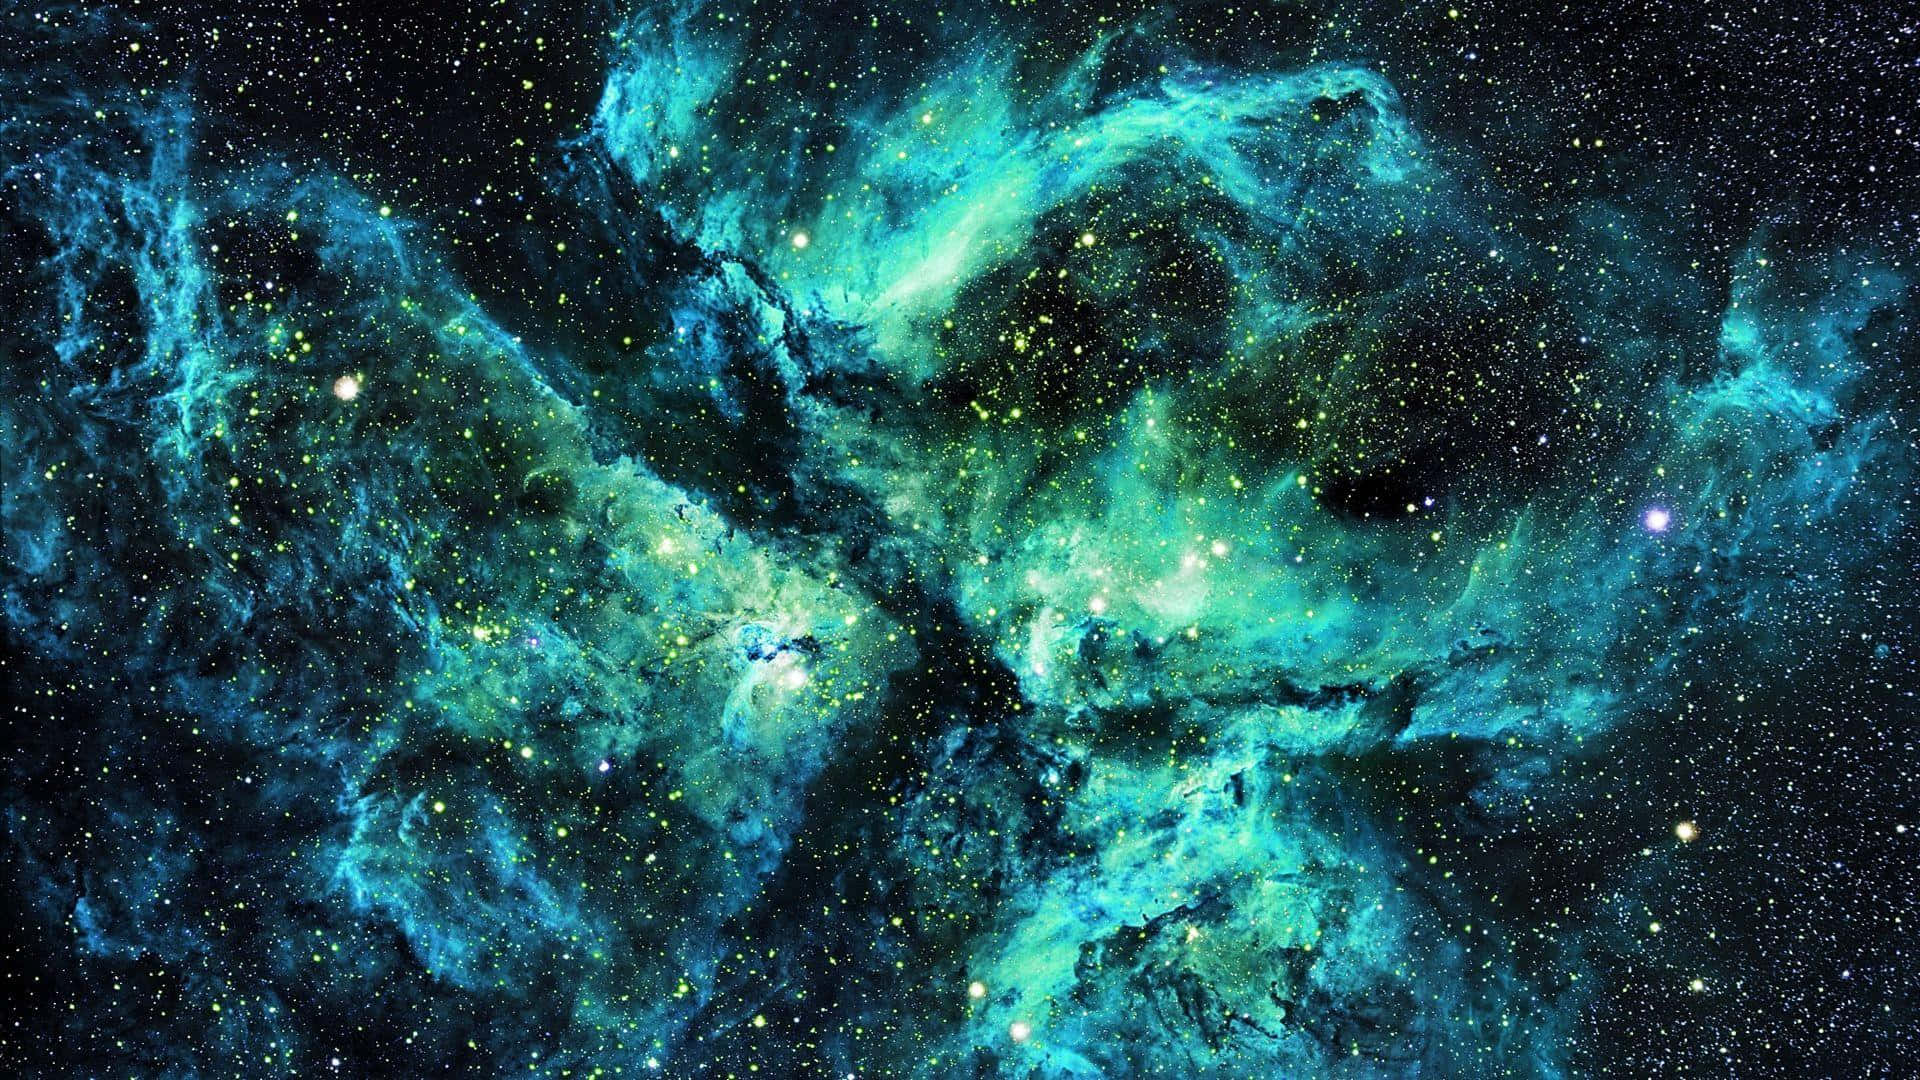 "Explore the wonders of the Green and Blue Galaxy" Wallpaper